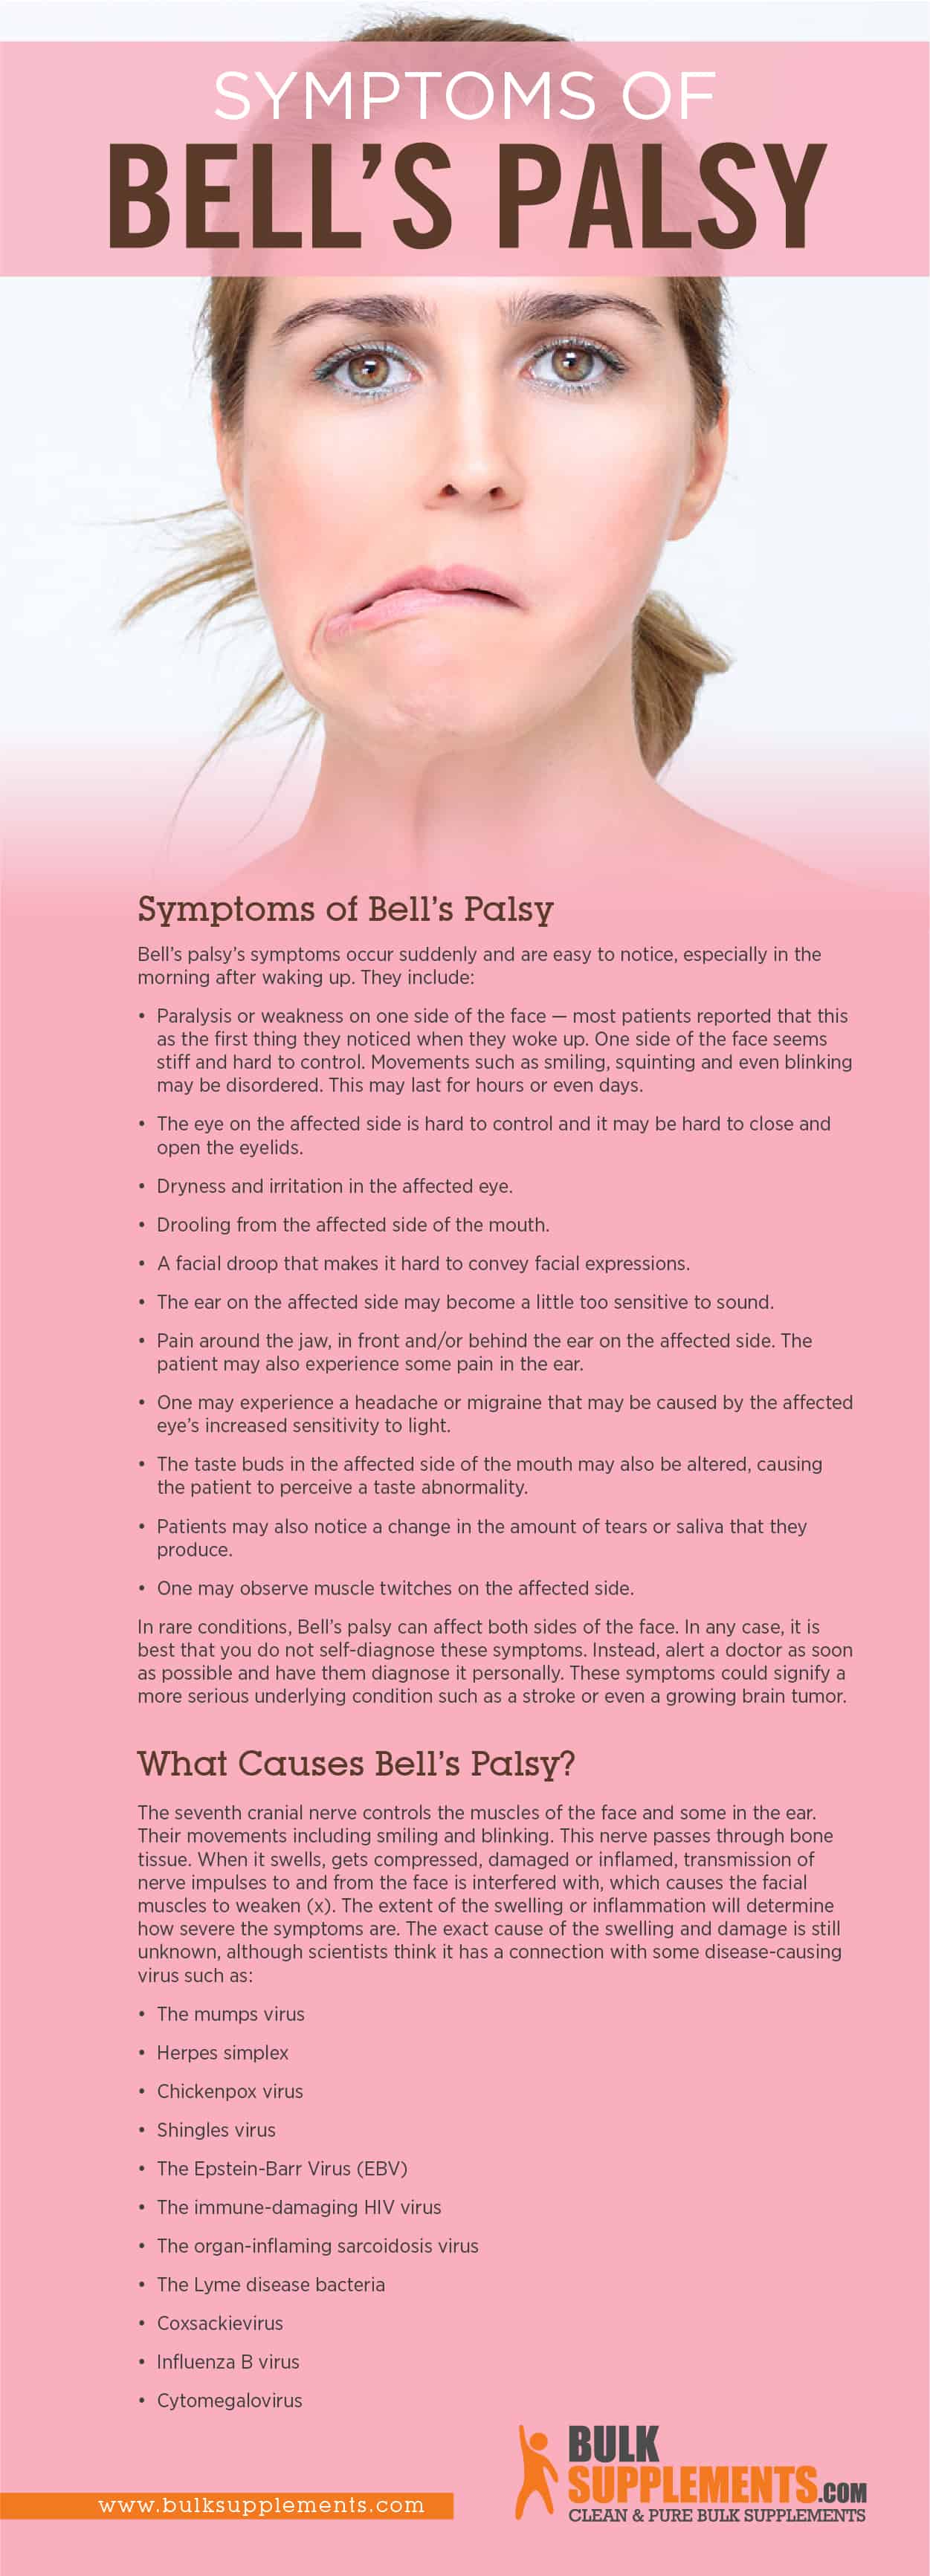 Bell's Palsy: Causes, Symptoms, & Treatment